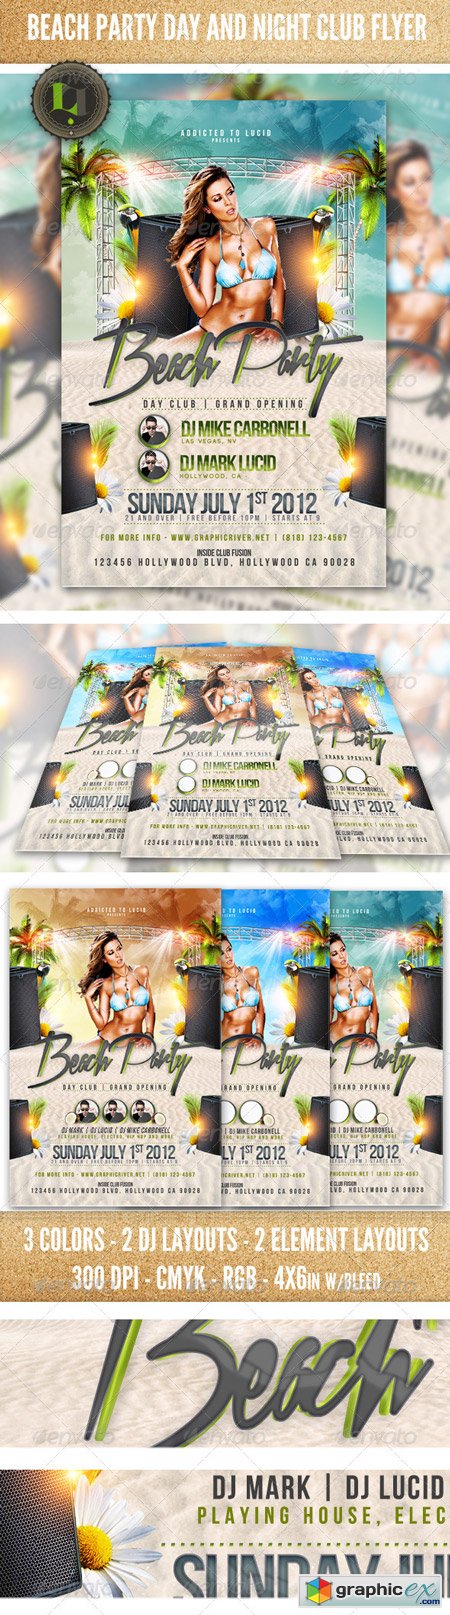 Beach Party Day and Night Club Flyer